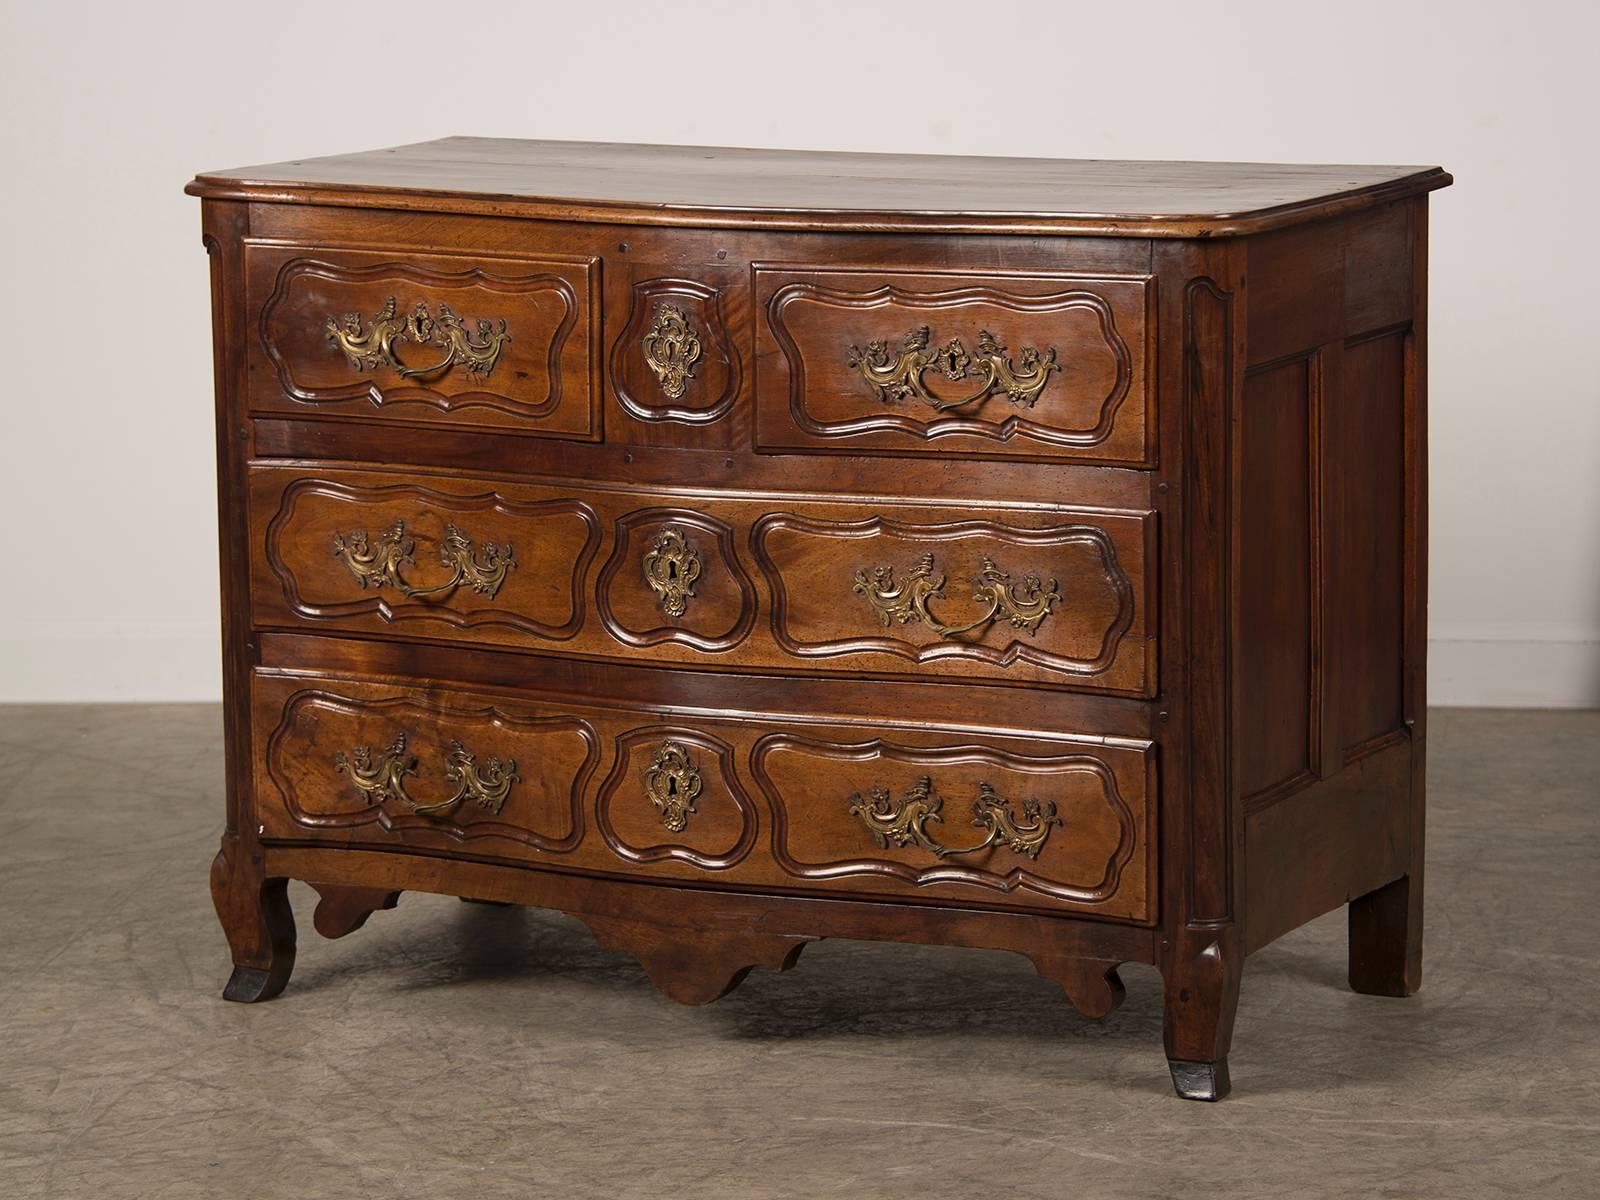 Receive our new selections direct from 1stdibs by email each week. Please click Follow Dealer below and see them first!

A Louis XV period antique French Provençal walnut commode circa 1750 with a serpentine front having two short drawers above